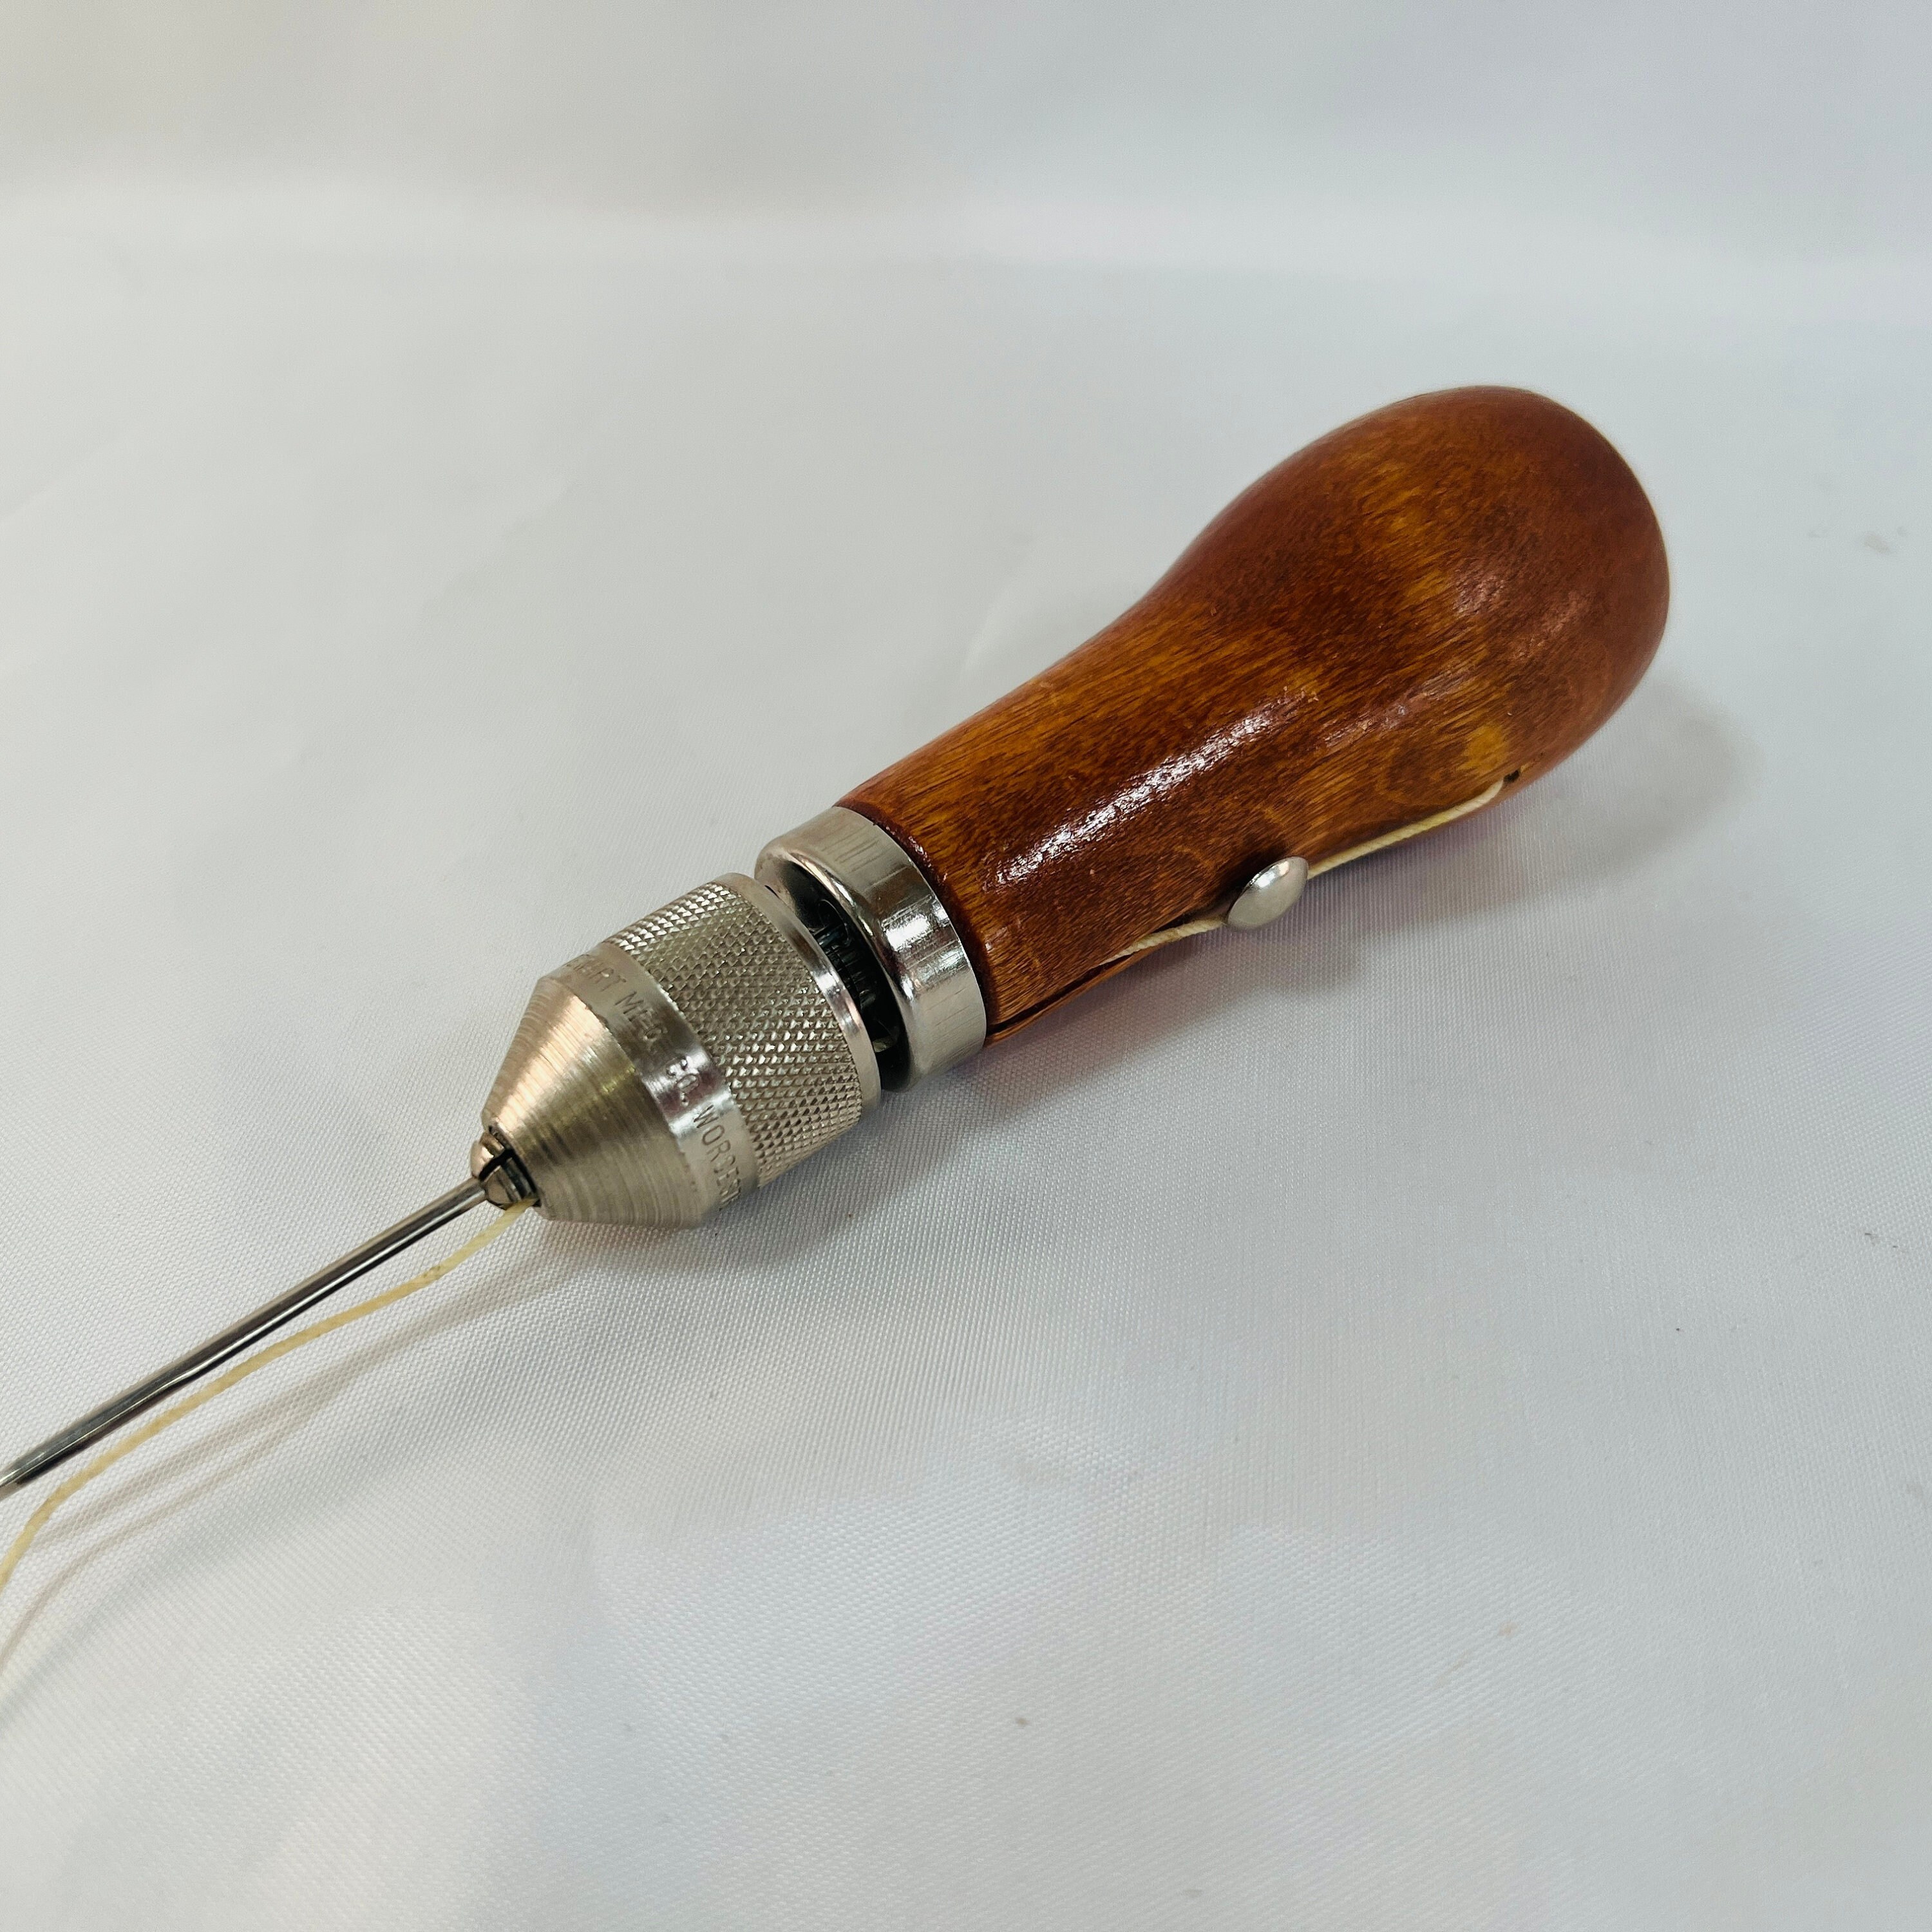 Sewing Awl Speedy Stitcher Extra Bobbin for Leather Coarse Waxed